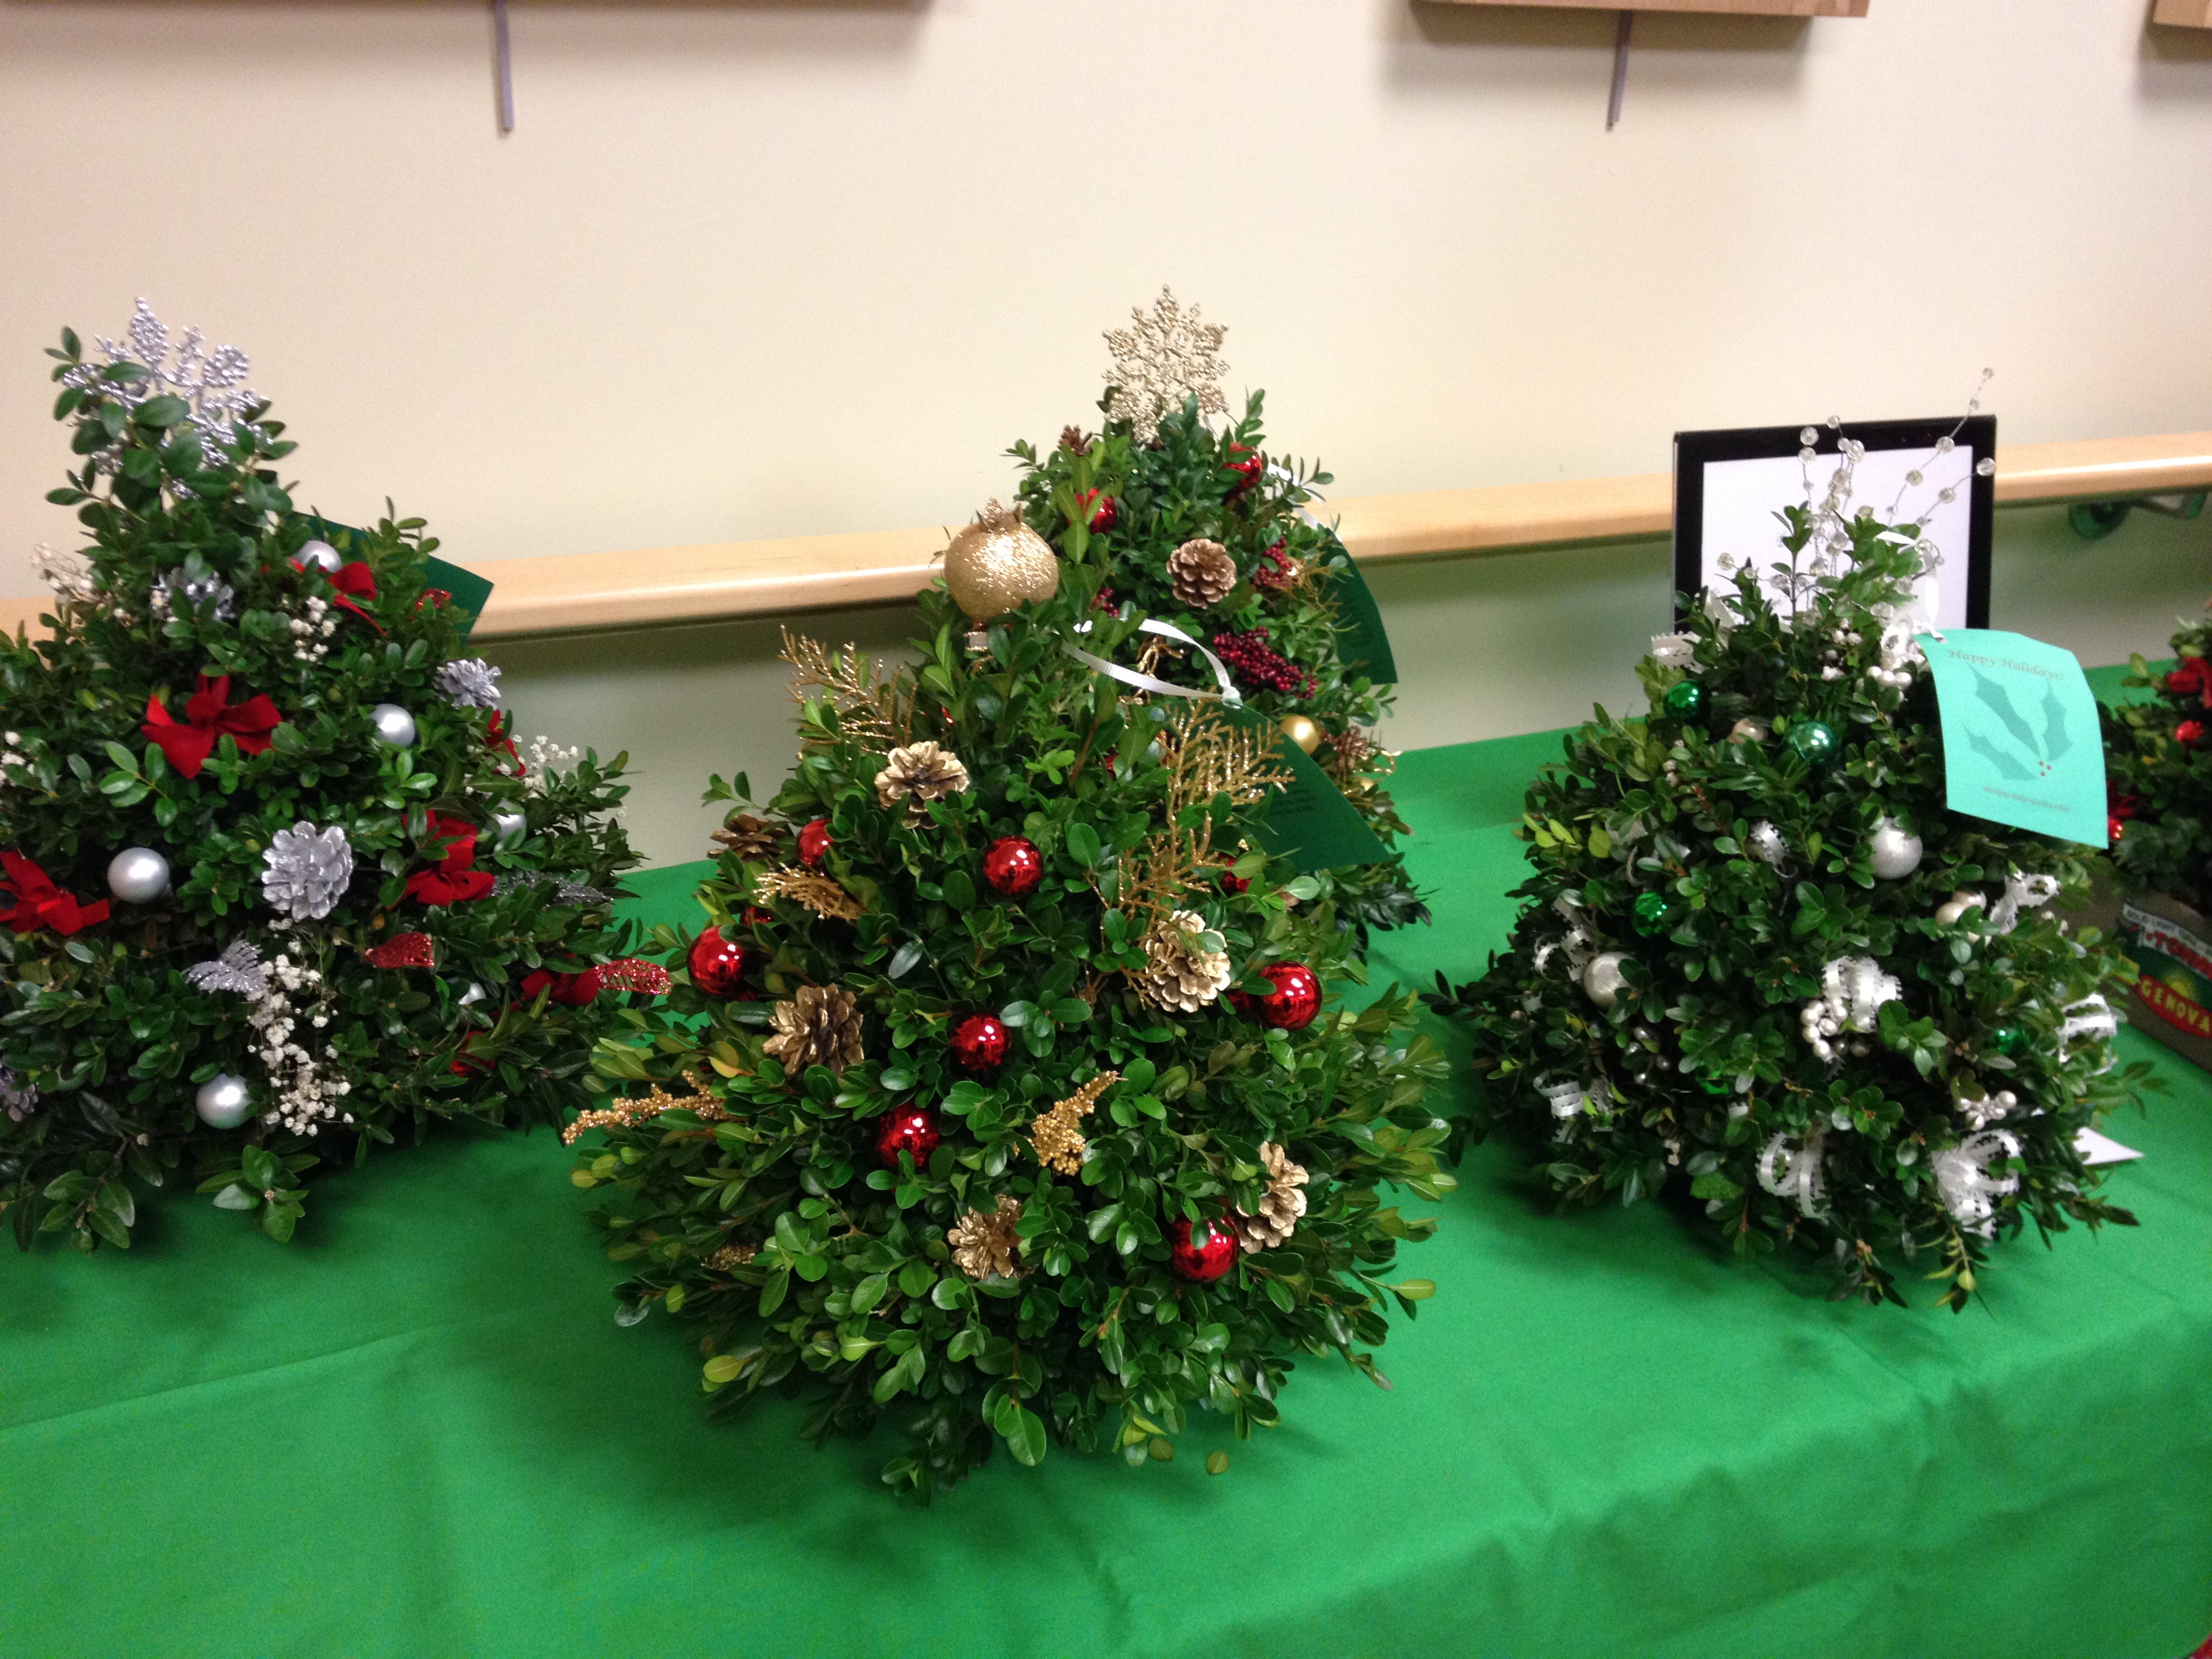 Shoppers can purchase boxwood Christmas tree centerpieces at the VNA Annual Cookie Walk on December 9, 2017.